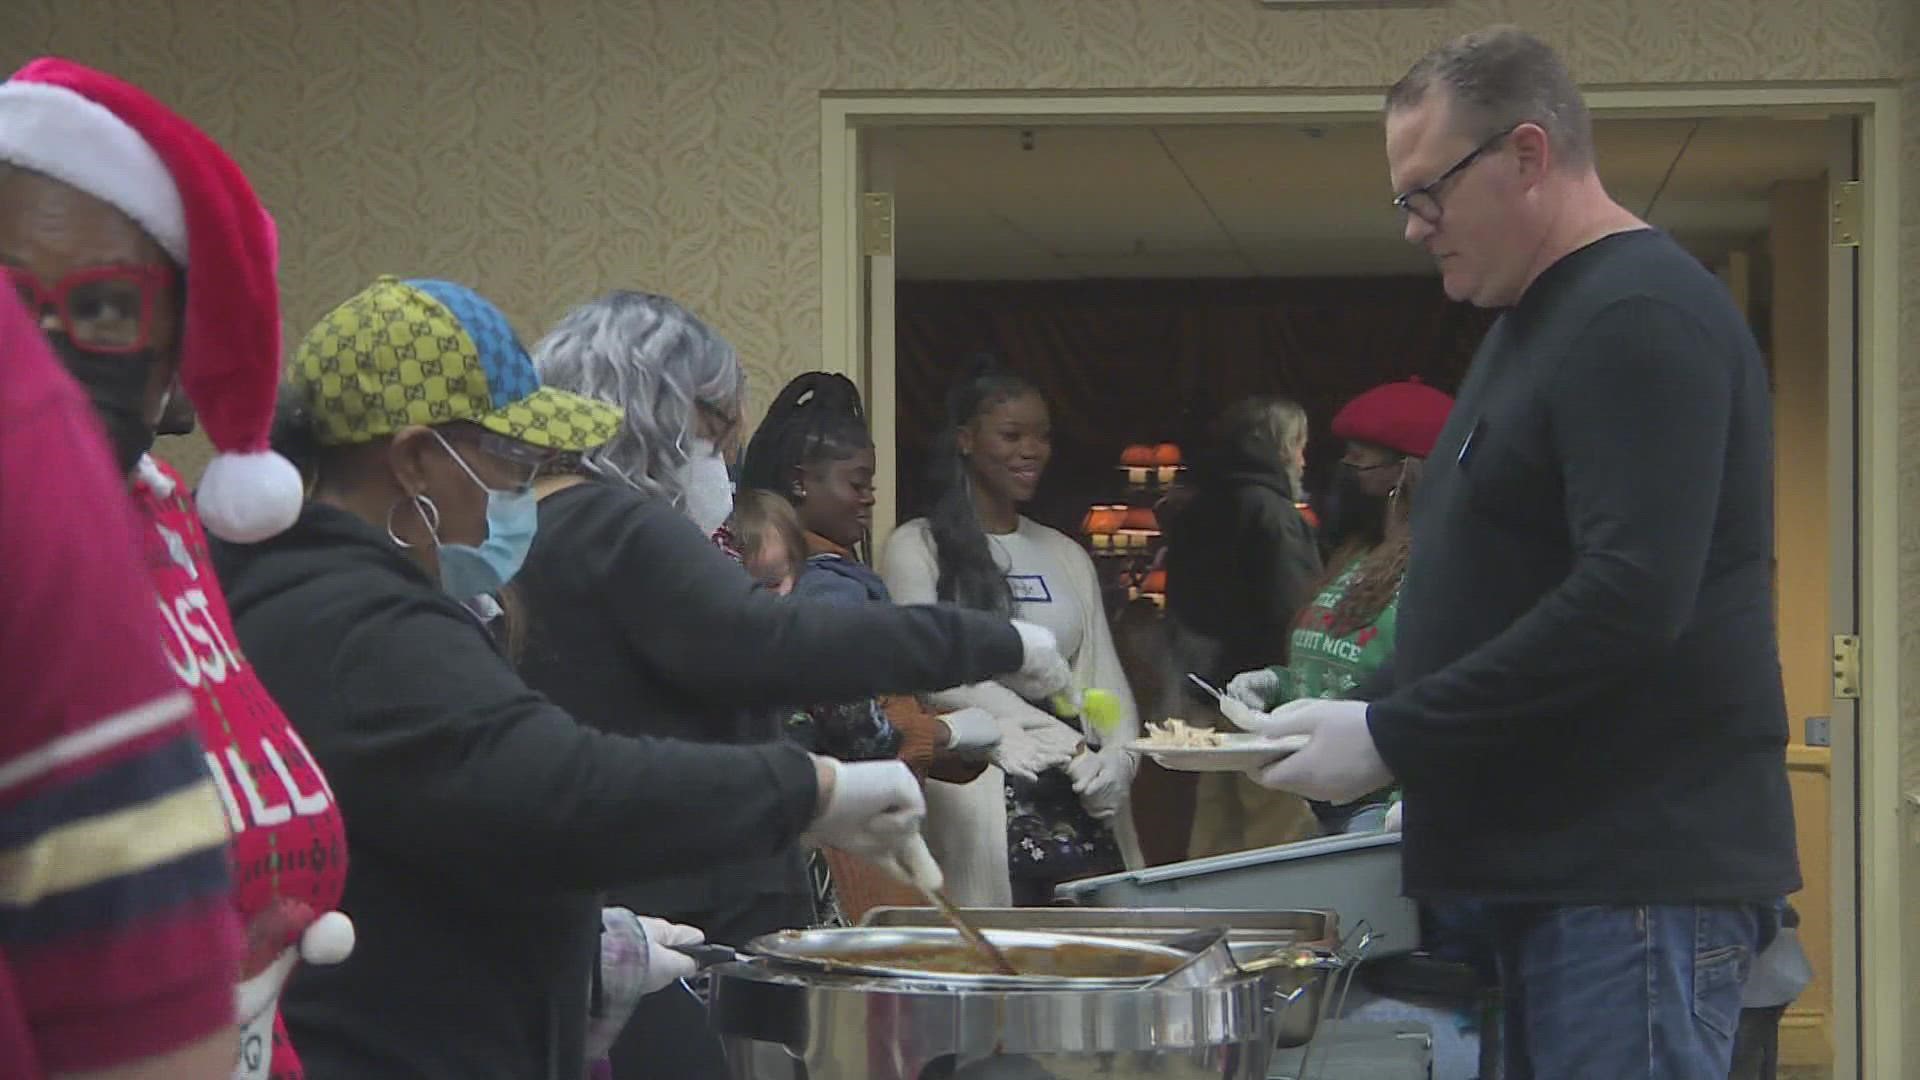 About 300 people volunteered their time this Christmas.